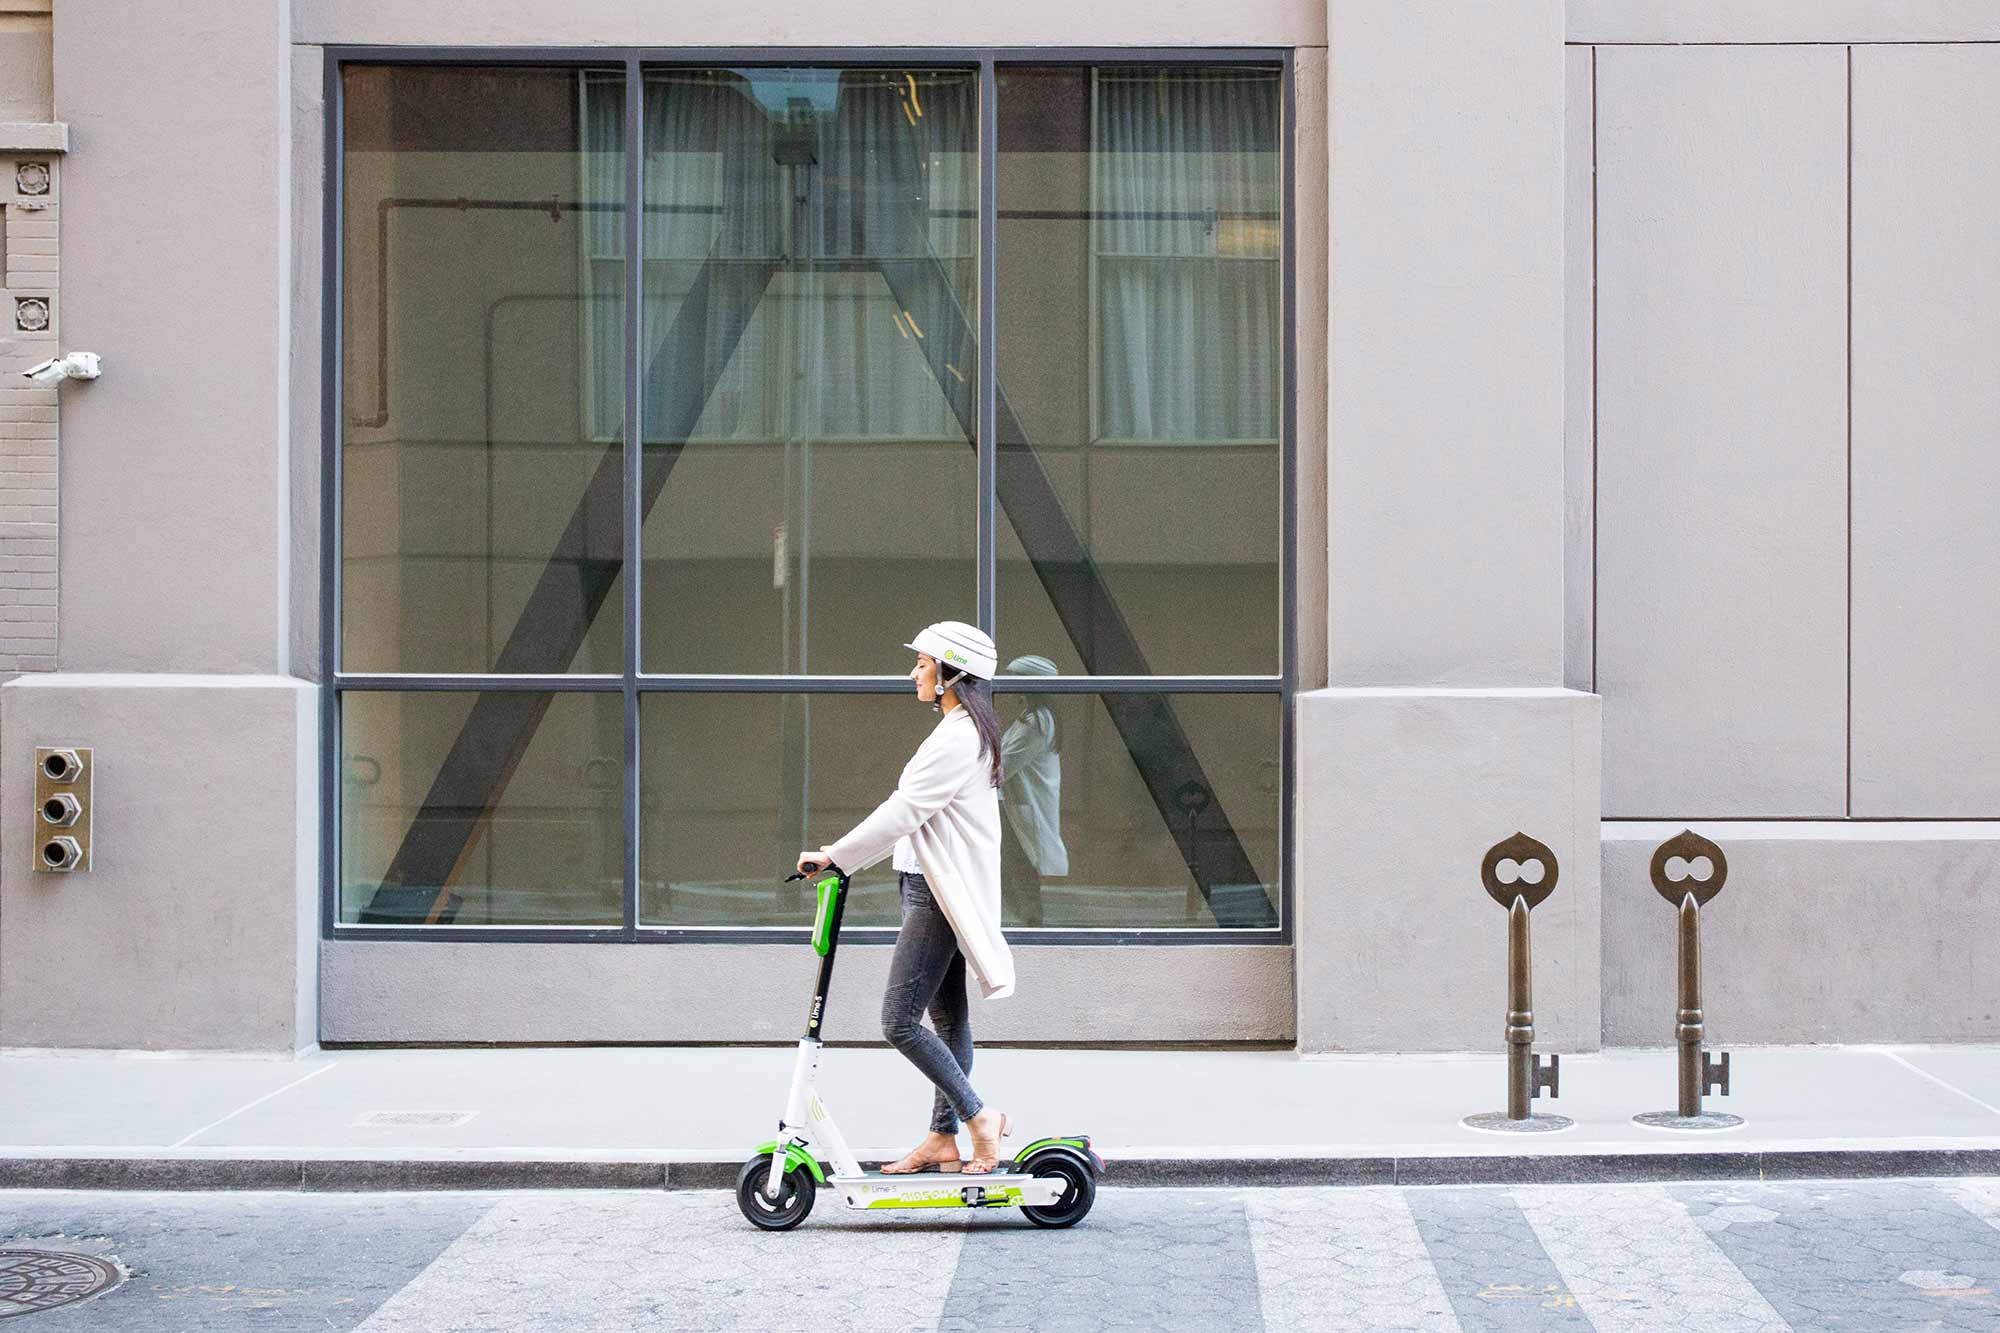 Lime partially suspends its scooter service due to coronavirus